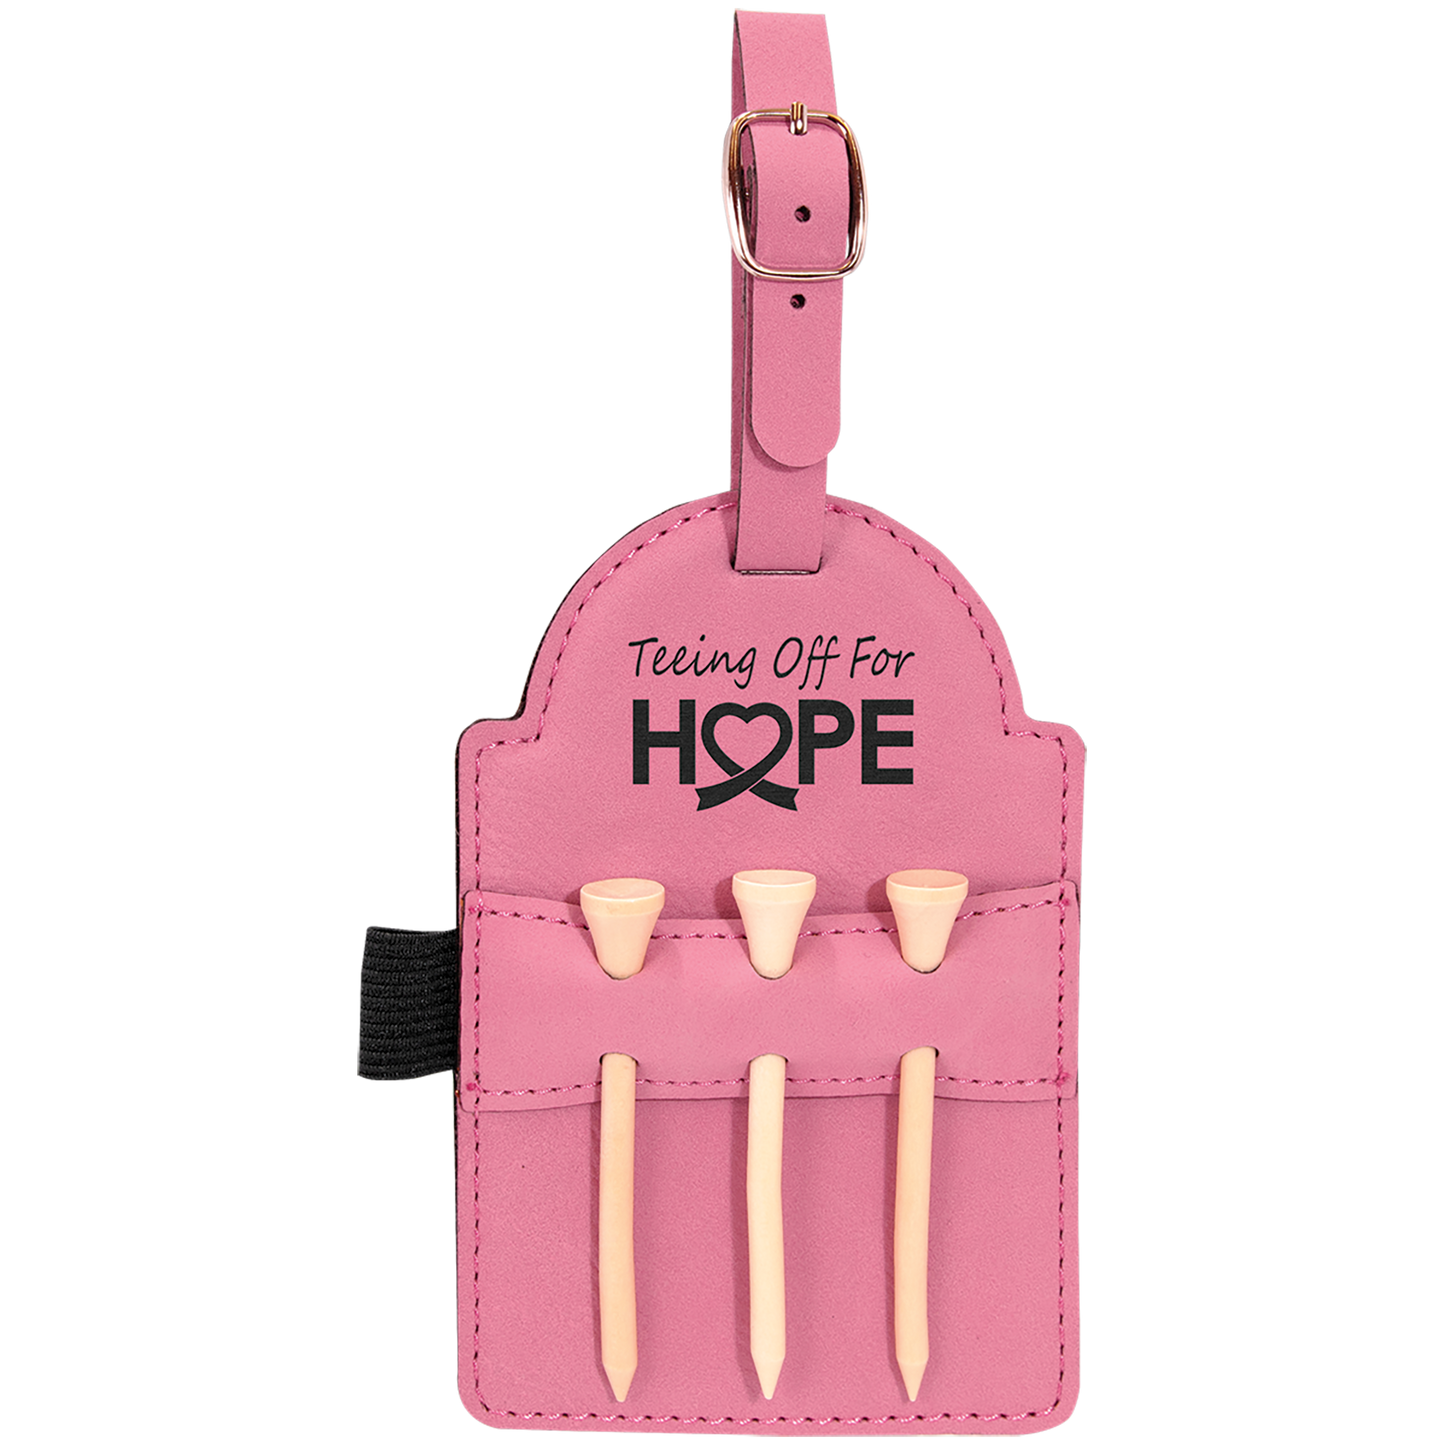 5" x 3 1/4" Pink Leatherette Golf Bag Tag with 3 Wooden Tees